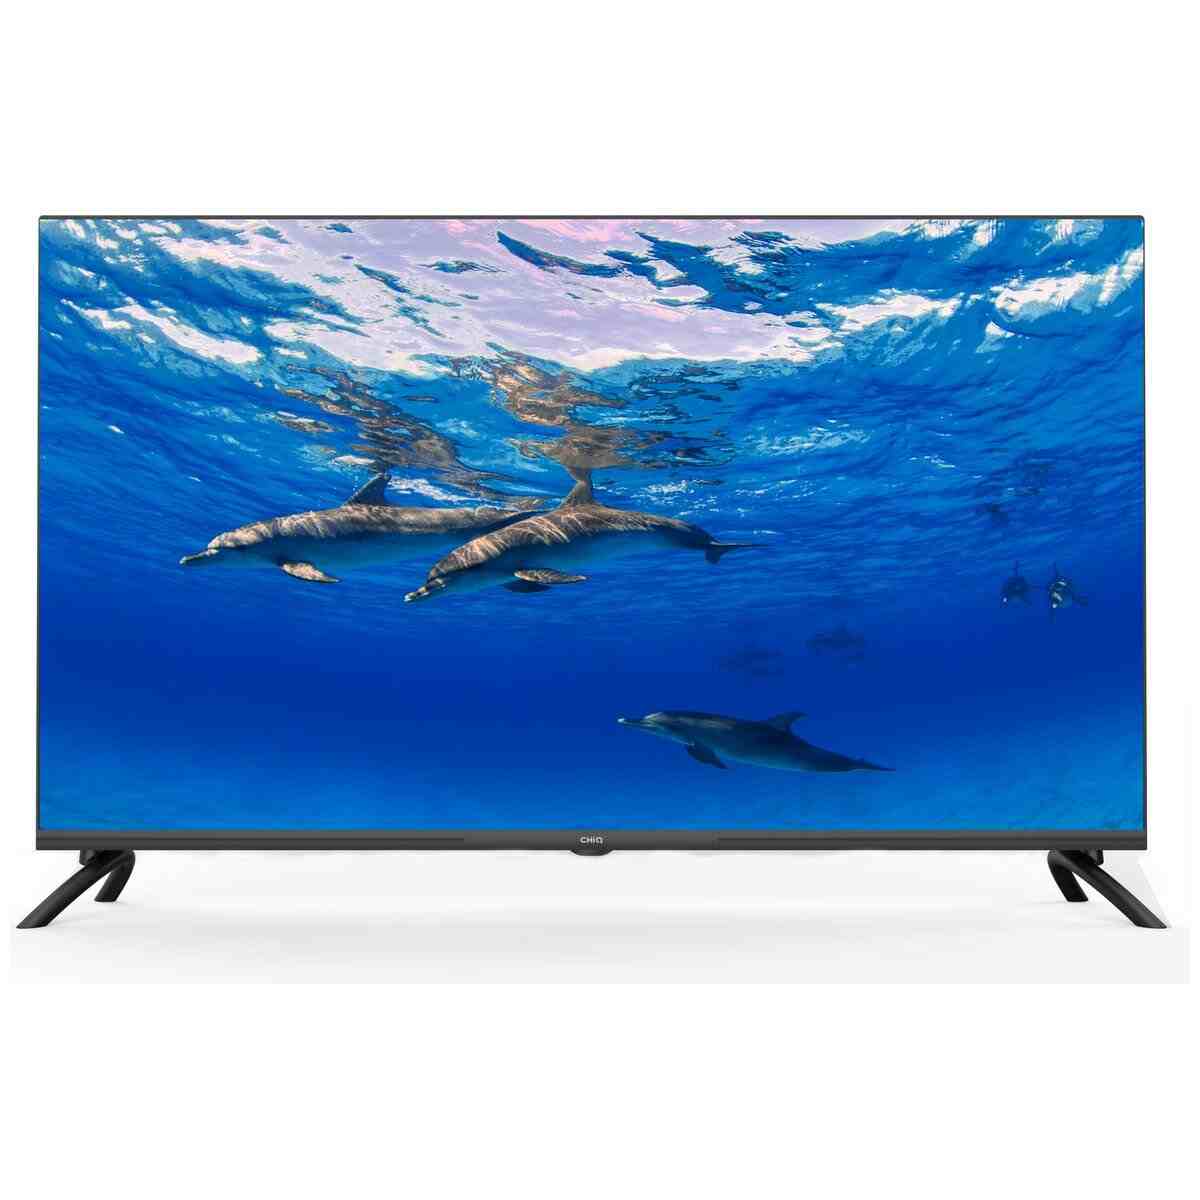 CHiQ 40 INCH Full HD Smart Android LED TV